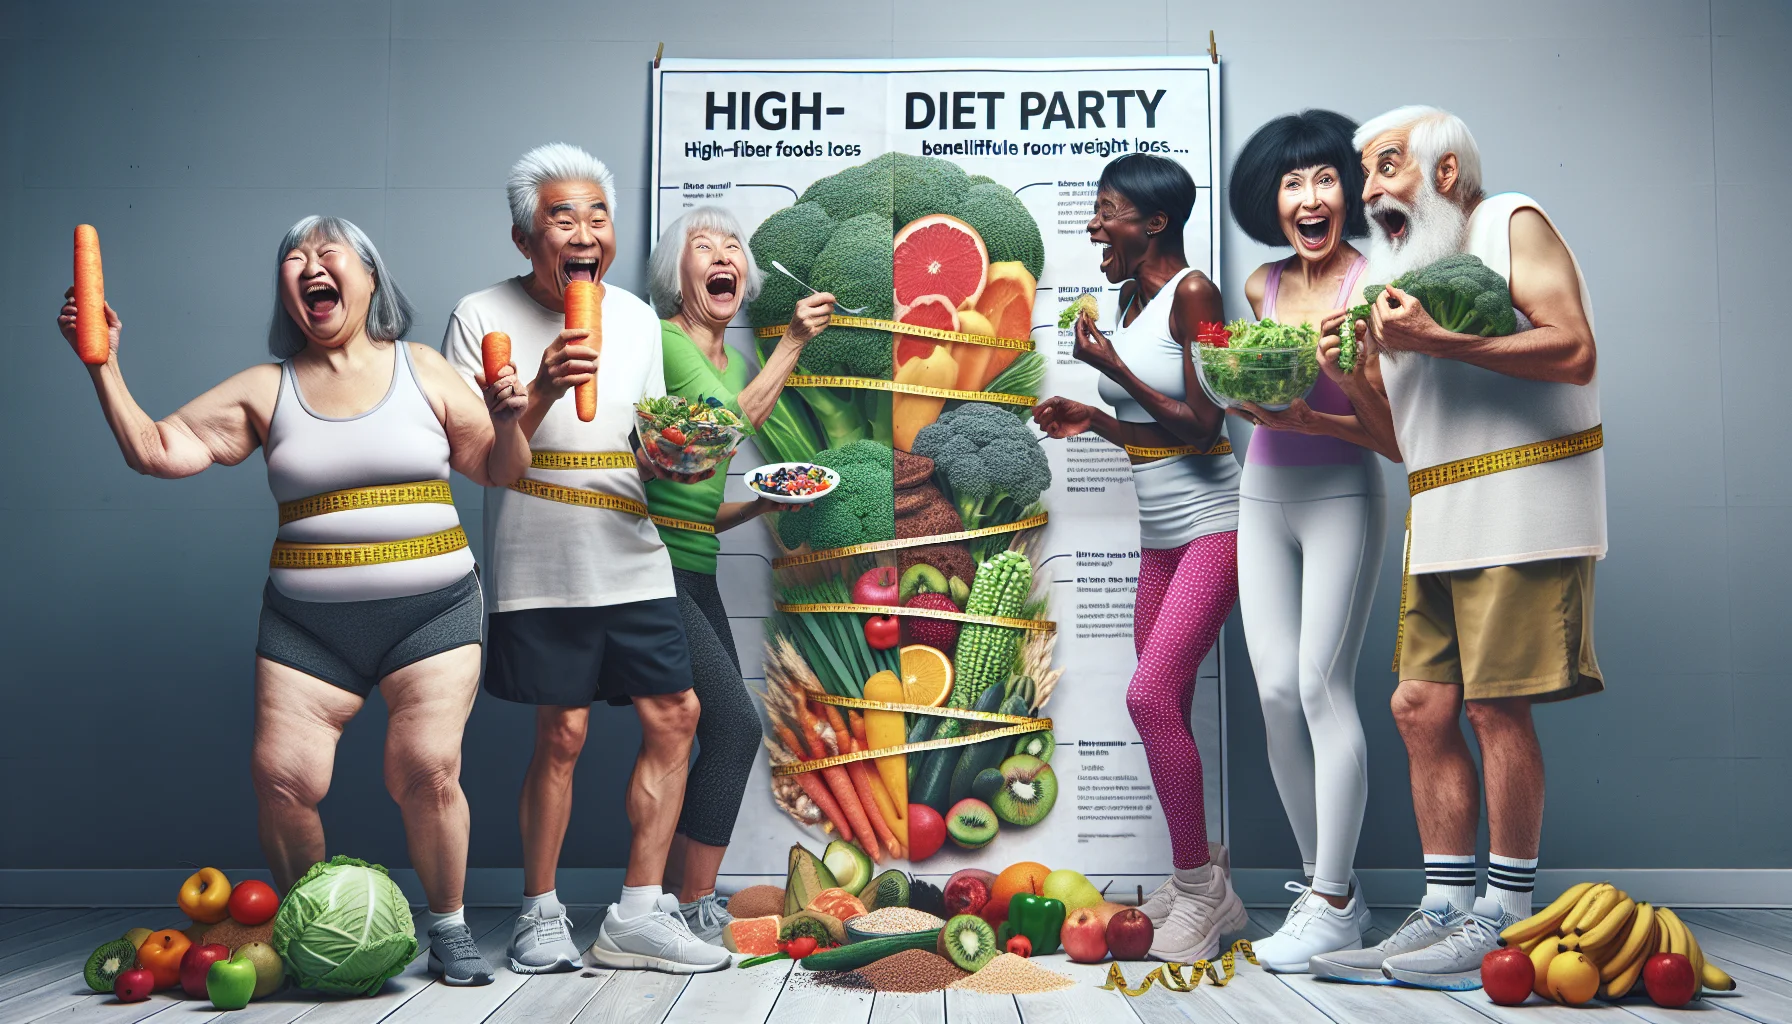 An amusing and realistic image of an elderly group indulging in a diet party. A tall chart on the side elaborates on high-fiber foods beneficial for weight loss, with colourful diagrams of fruits, vegetables and grains. The group consists of an Asian woman merrily munching on a carrot, a Middle Eastern man laughing out loud while holding a bowl of salad, a Black woman showing off a giant fruit salad, and a Caucasian man looking comically horrified at a large plate of broccoli. Everyone is clad in workout attire, reflecting the healthy and energetic theme of the image.